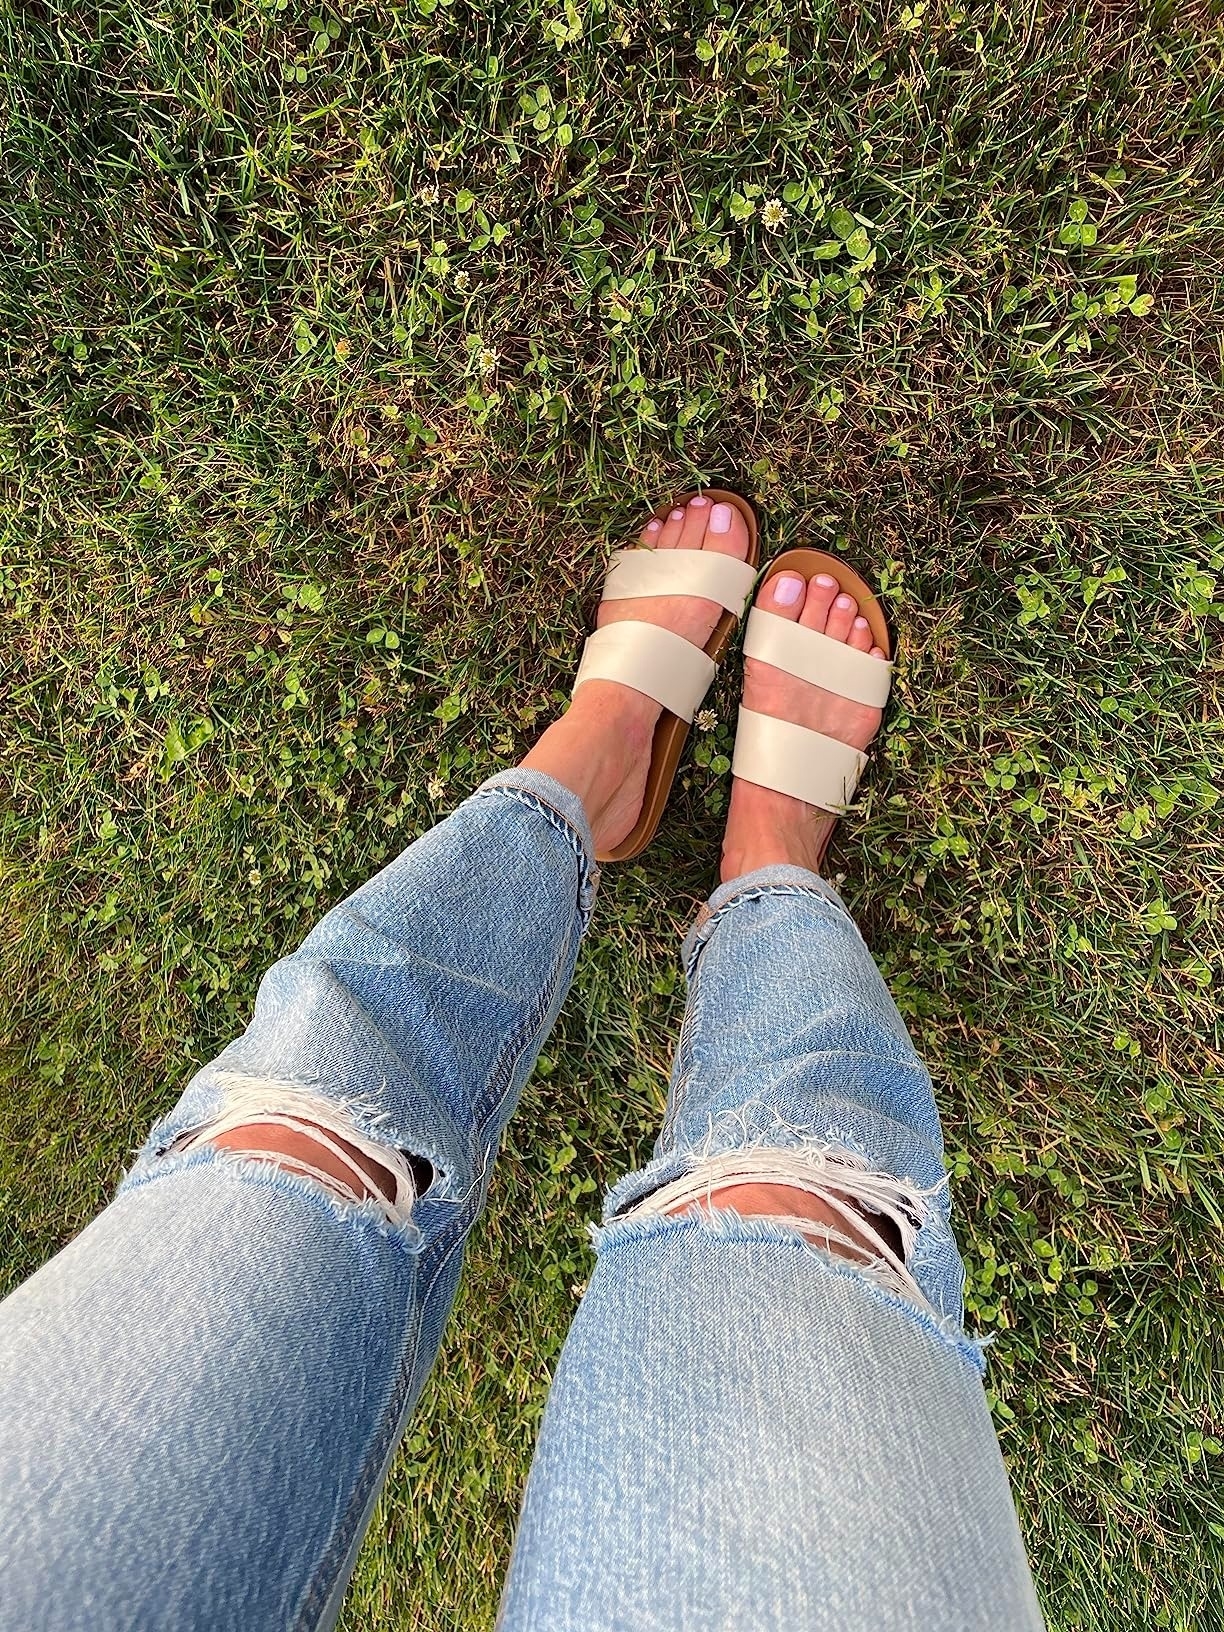 Best Shoes to Wear With Jeans for Women - Jaquelyn the Stylist